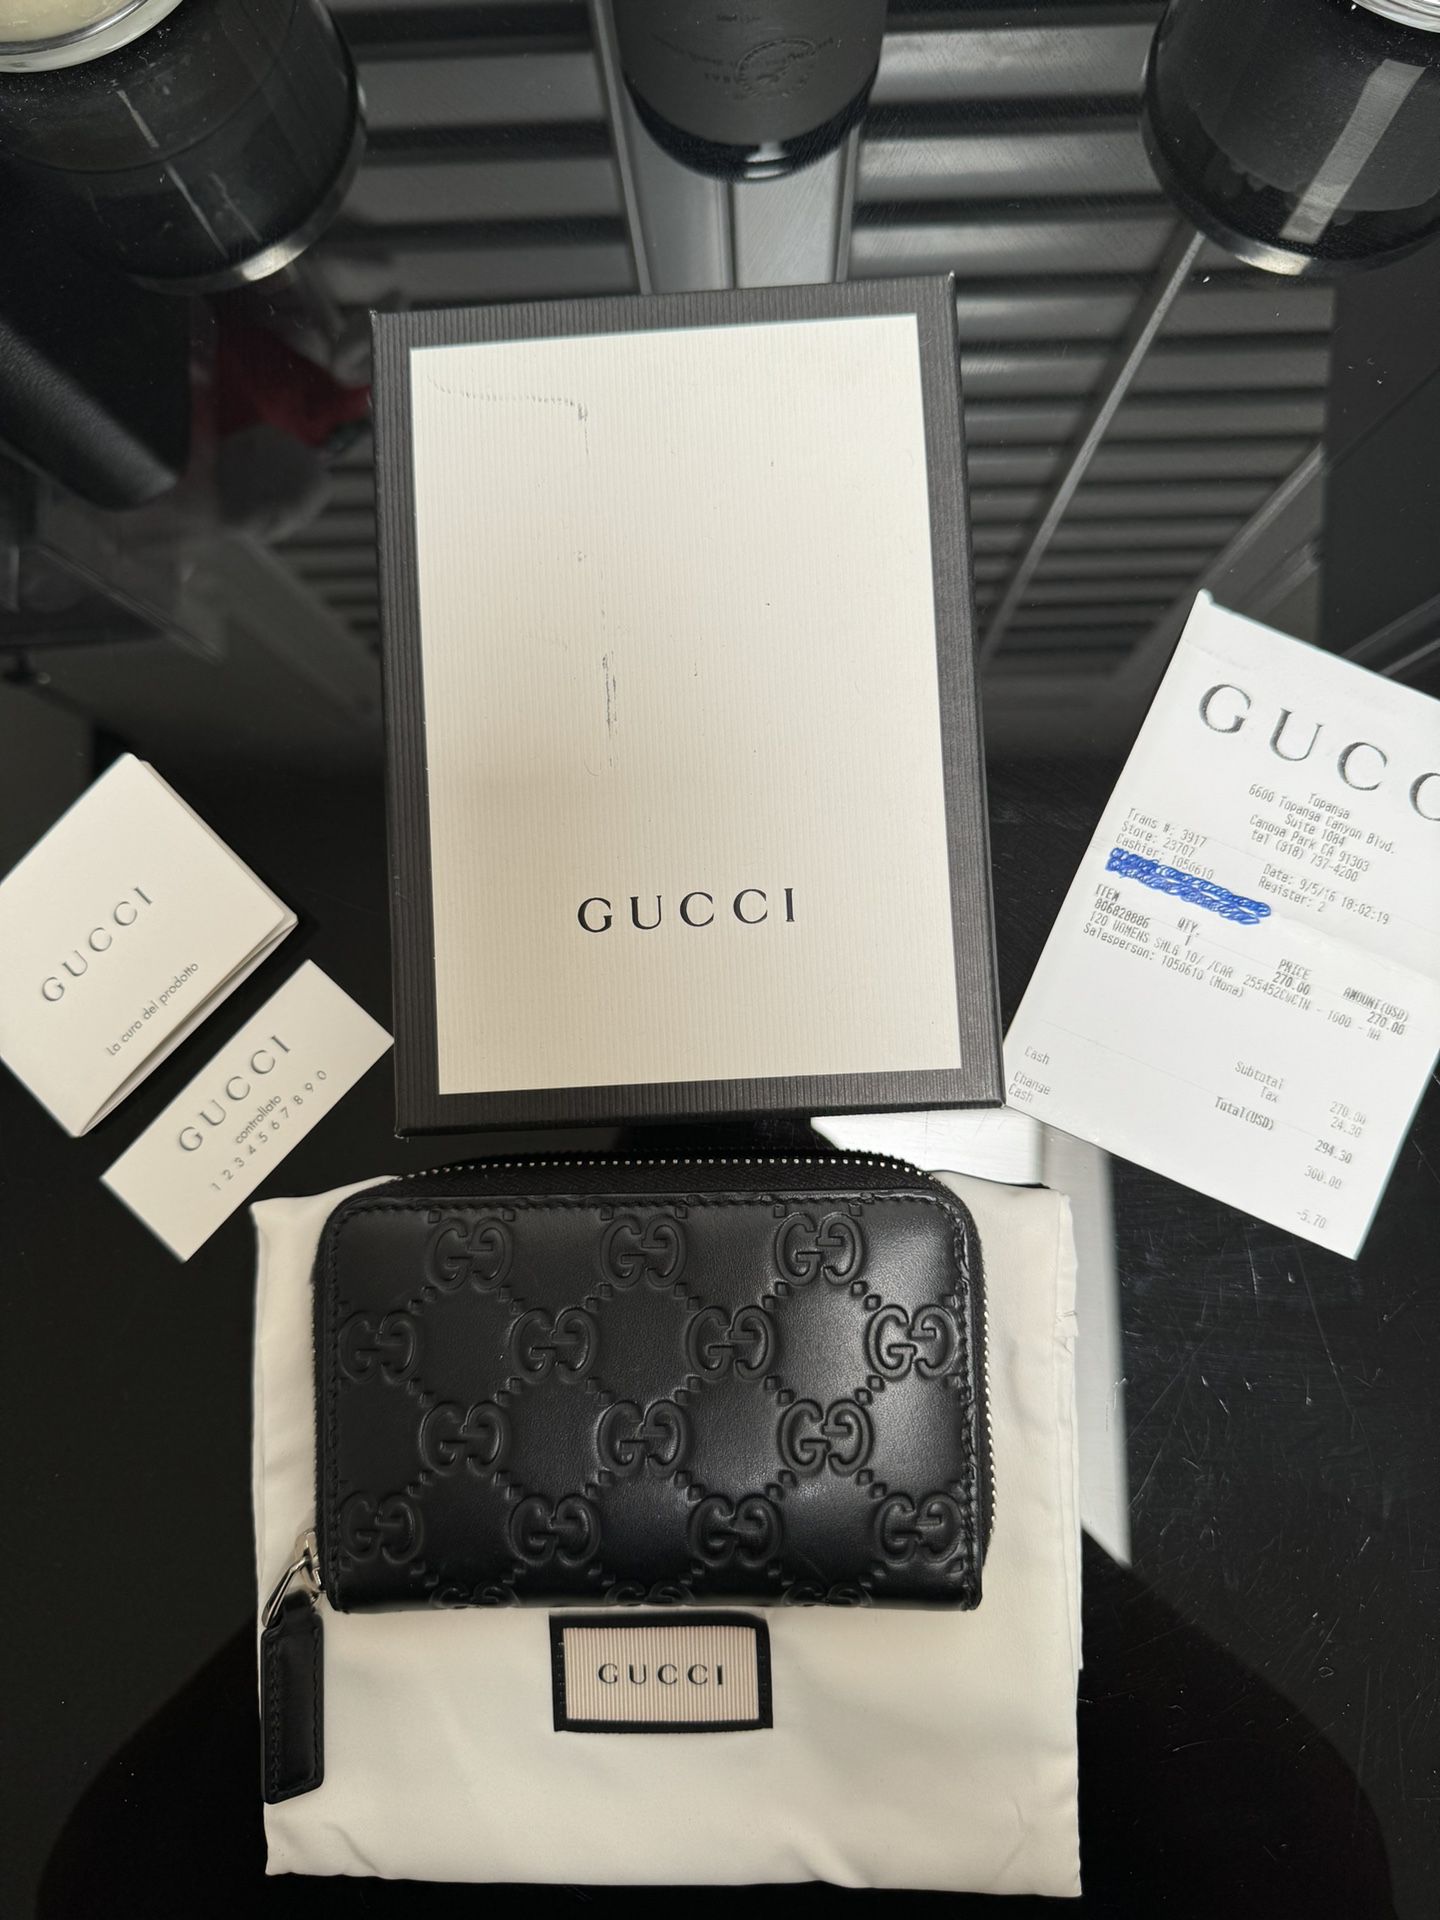 Gucci Leather Monogram Wallet.